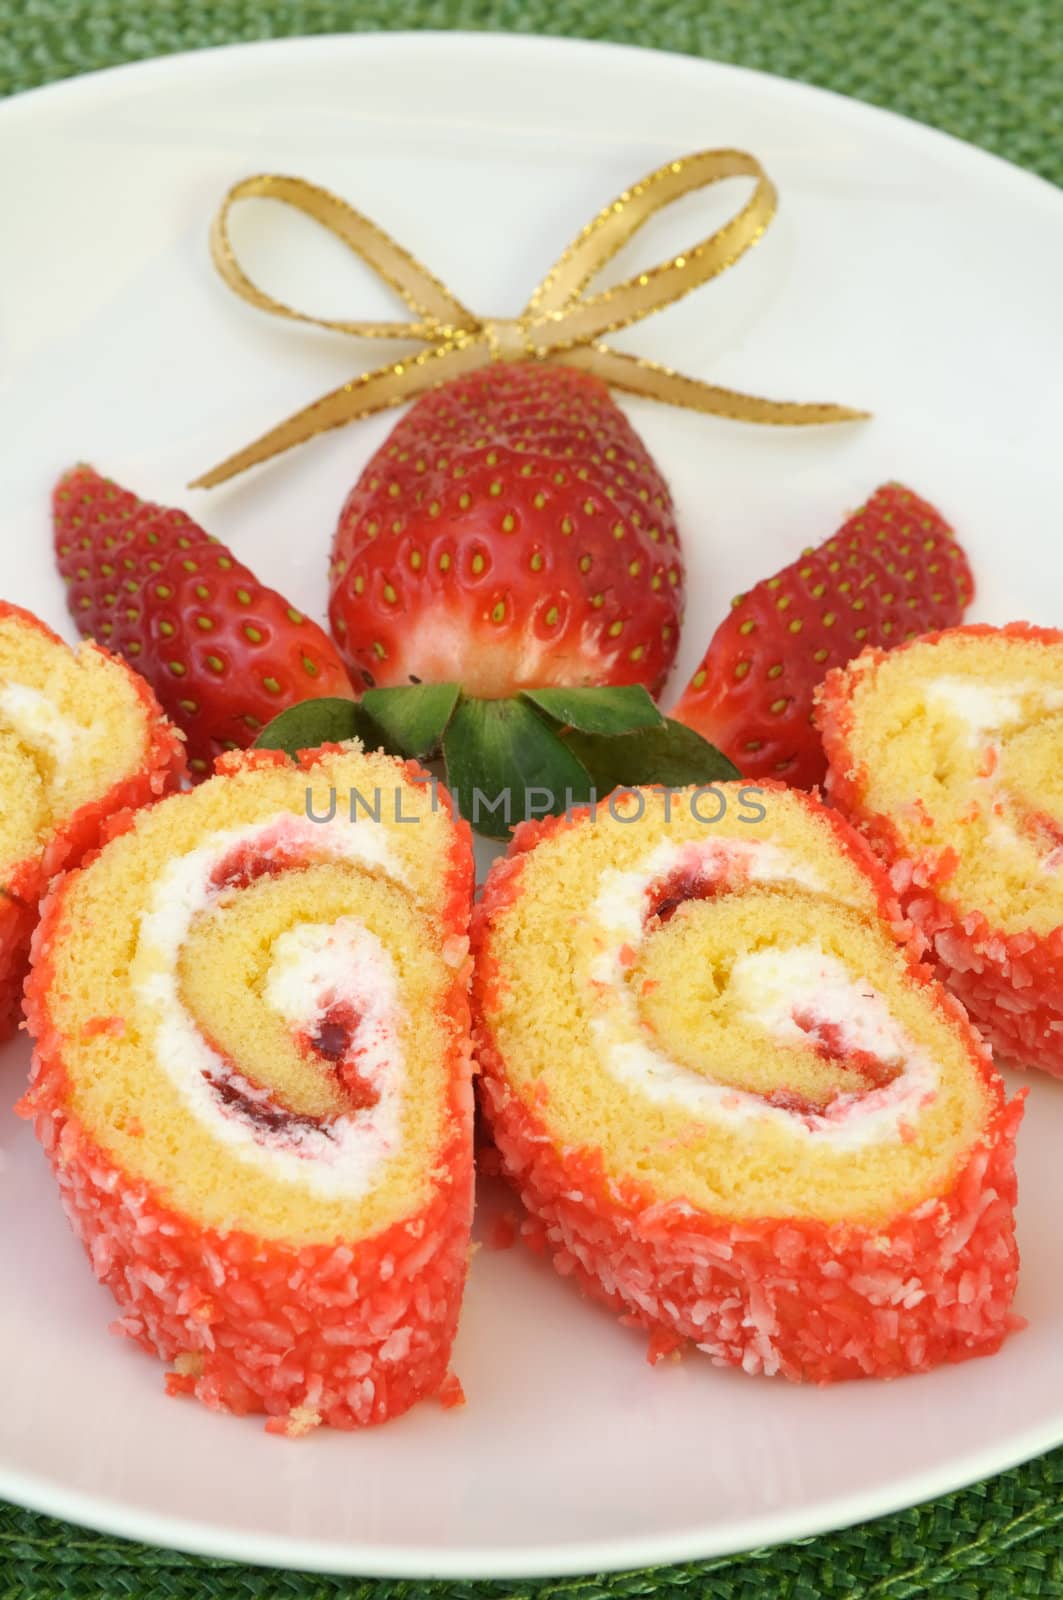 Jam roll cake slices decorated with strawberry and a golden ribbon